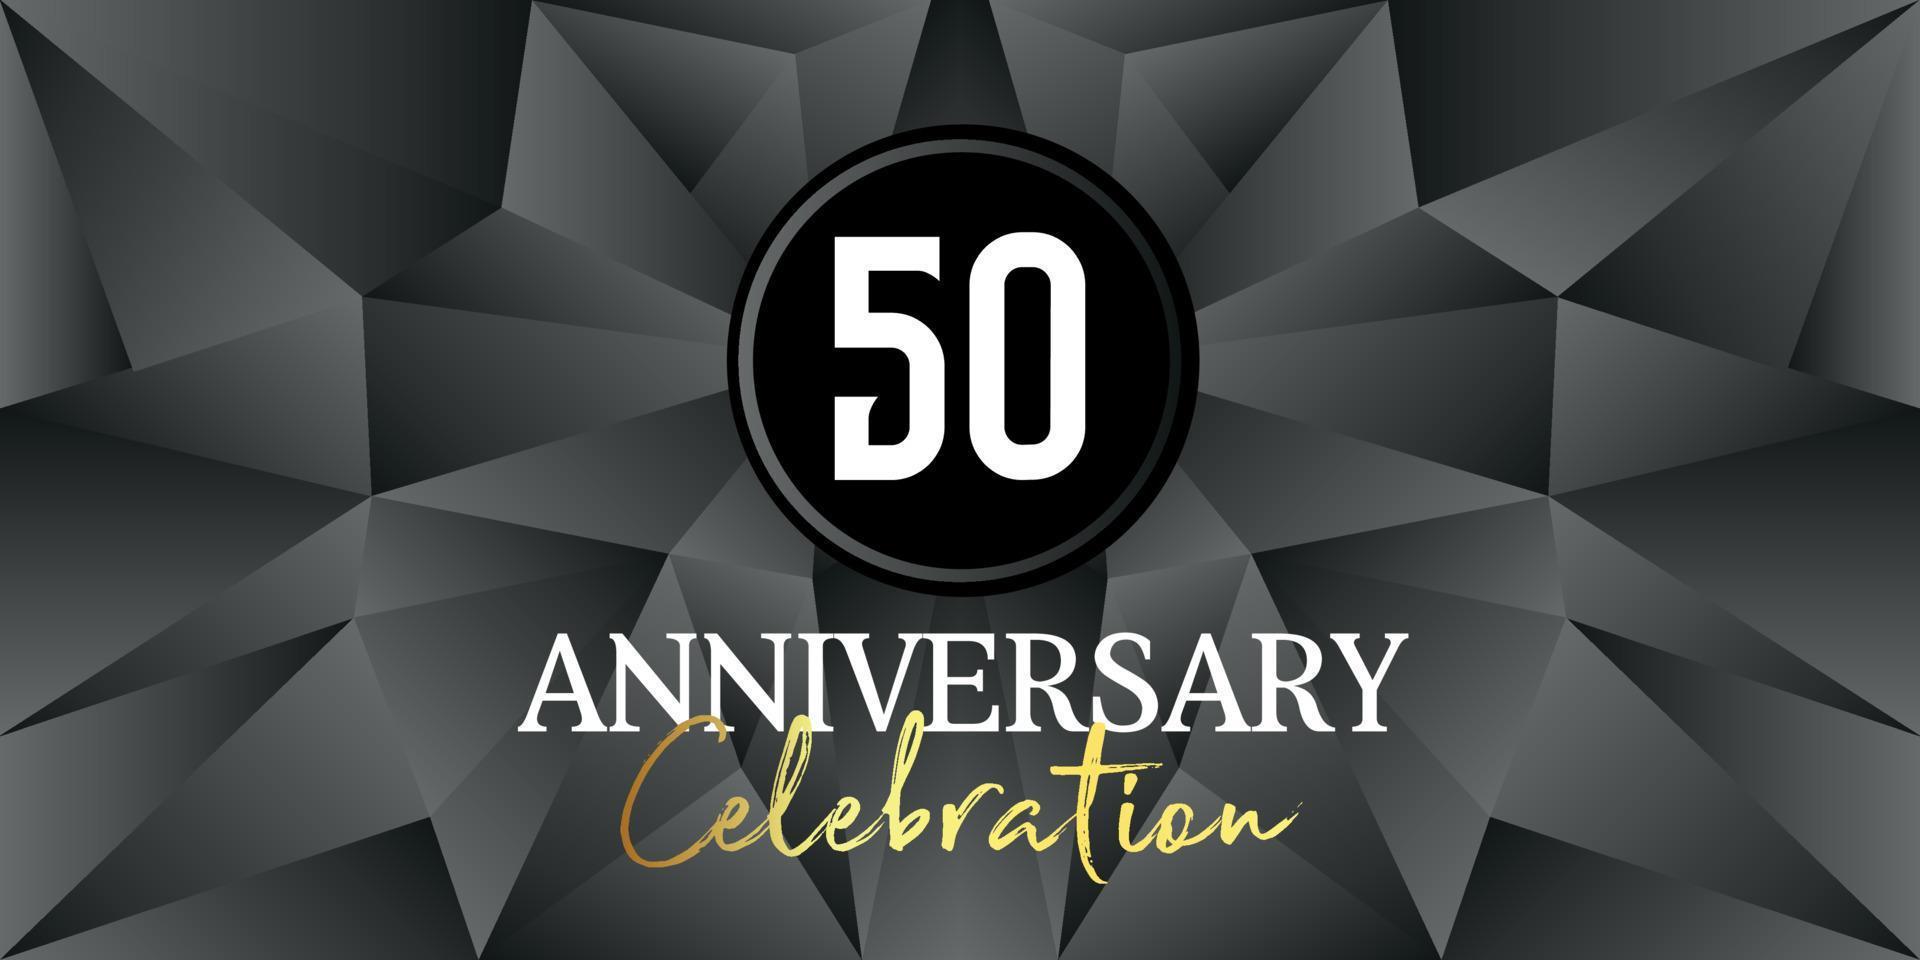 50 year anniversary celebration logo design white and gold color on Elegant Black Background Vector Art abstract background vector